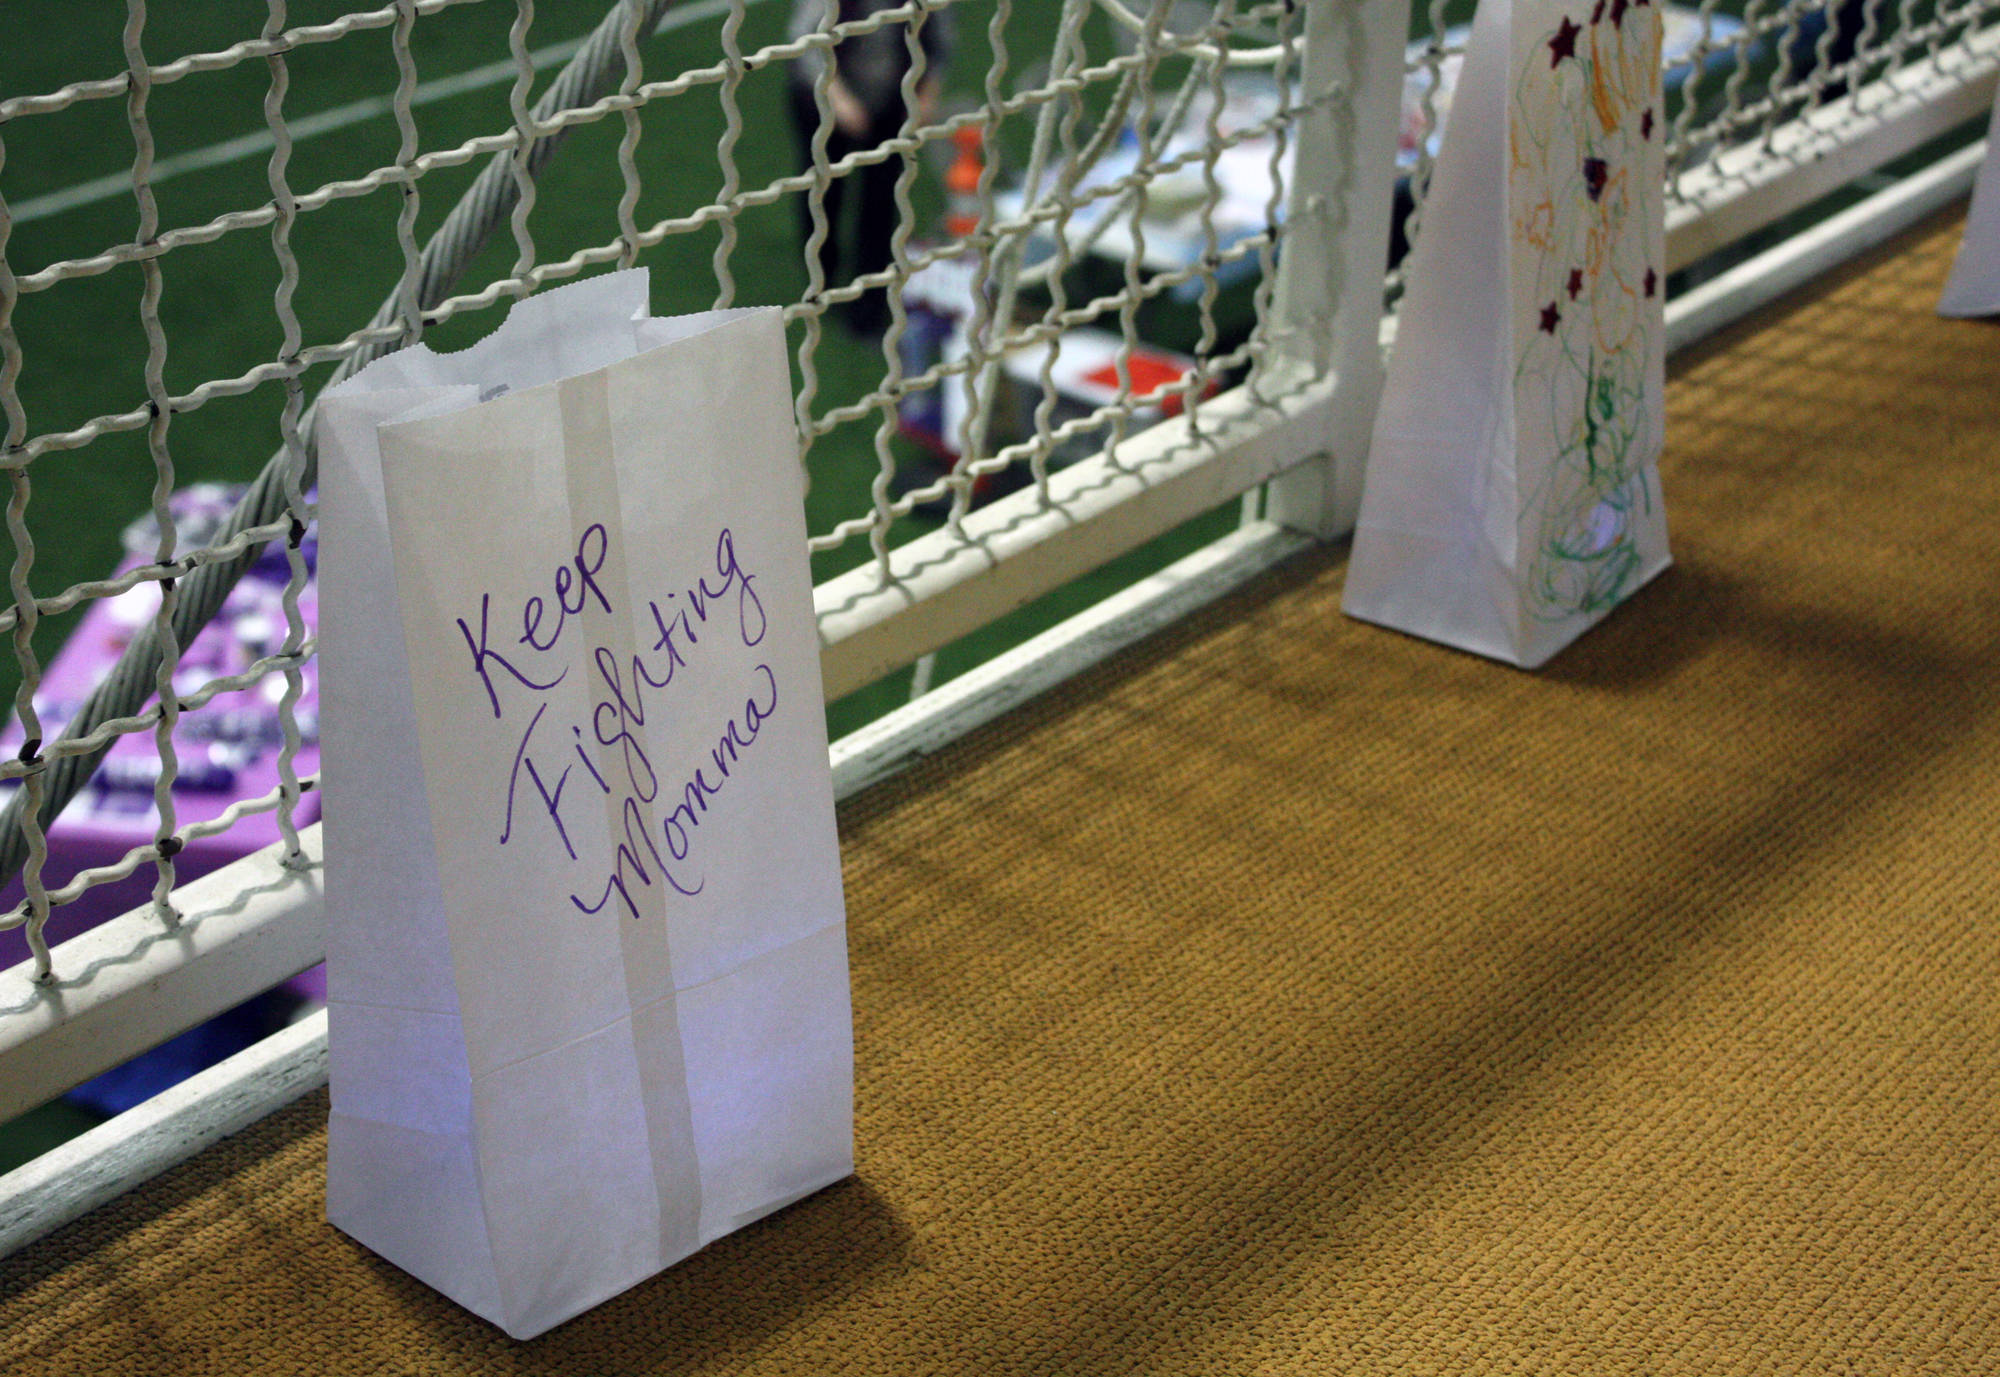 Luminara bags line the track at the Dimond Park Field House during the 2017 Relay For Life event Friday, July 14, 2017. (Erin Laughlin | For the Juneau Empire)